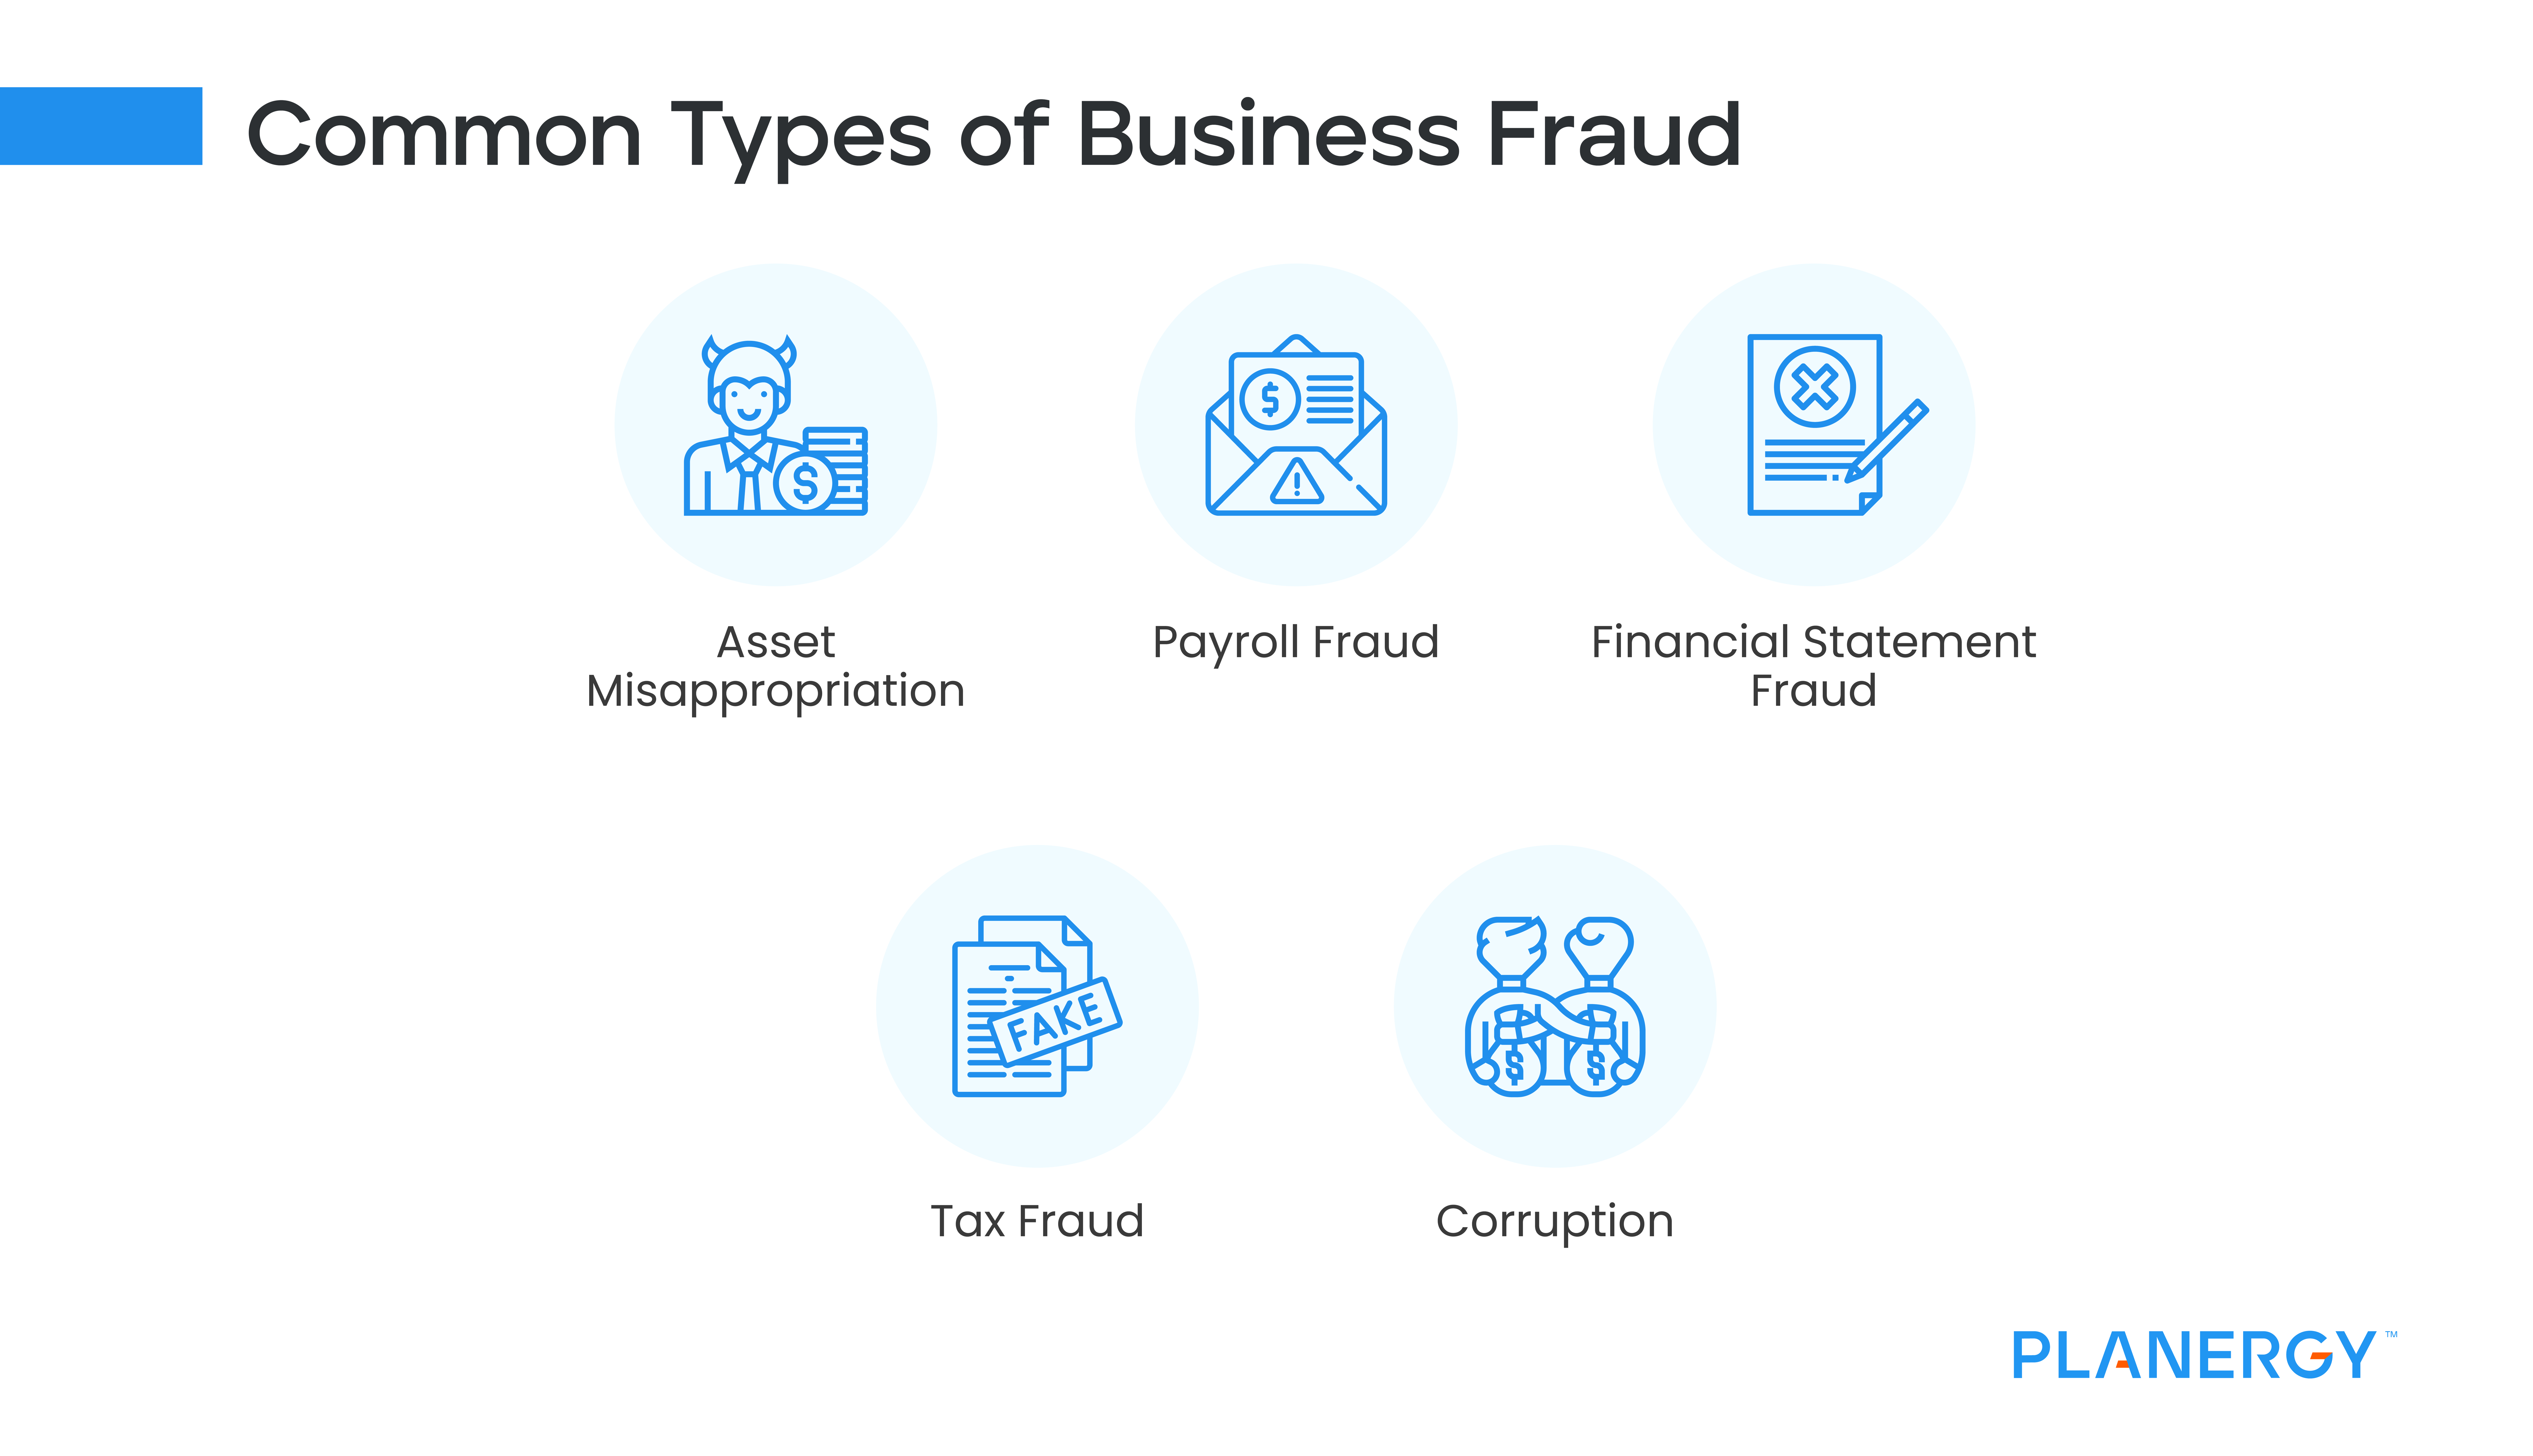 Common Types of Business Fraud